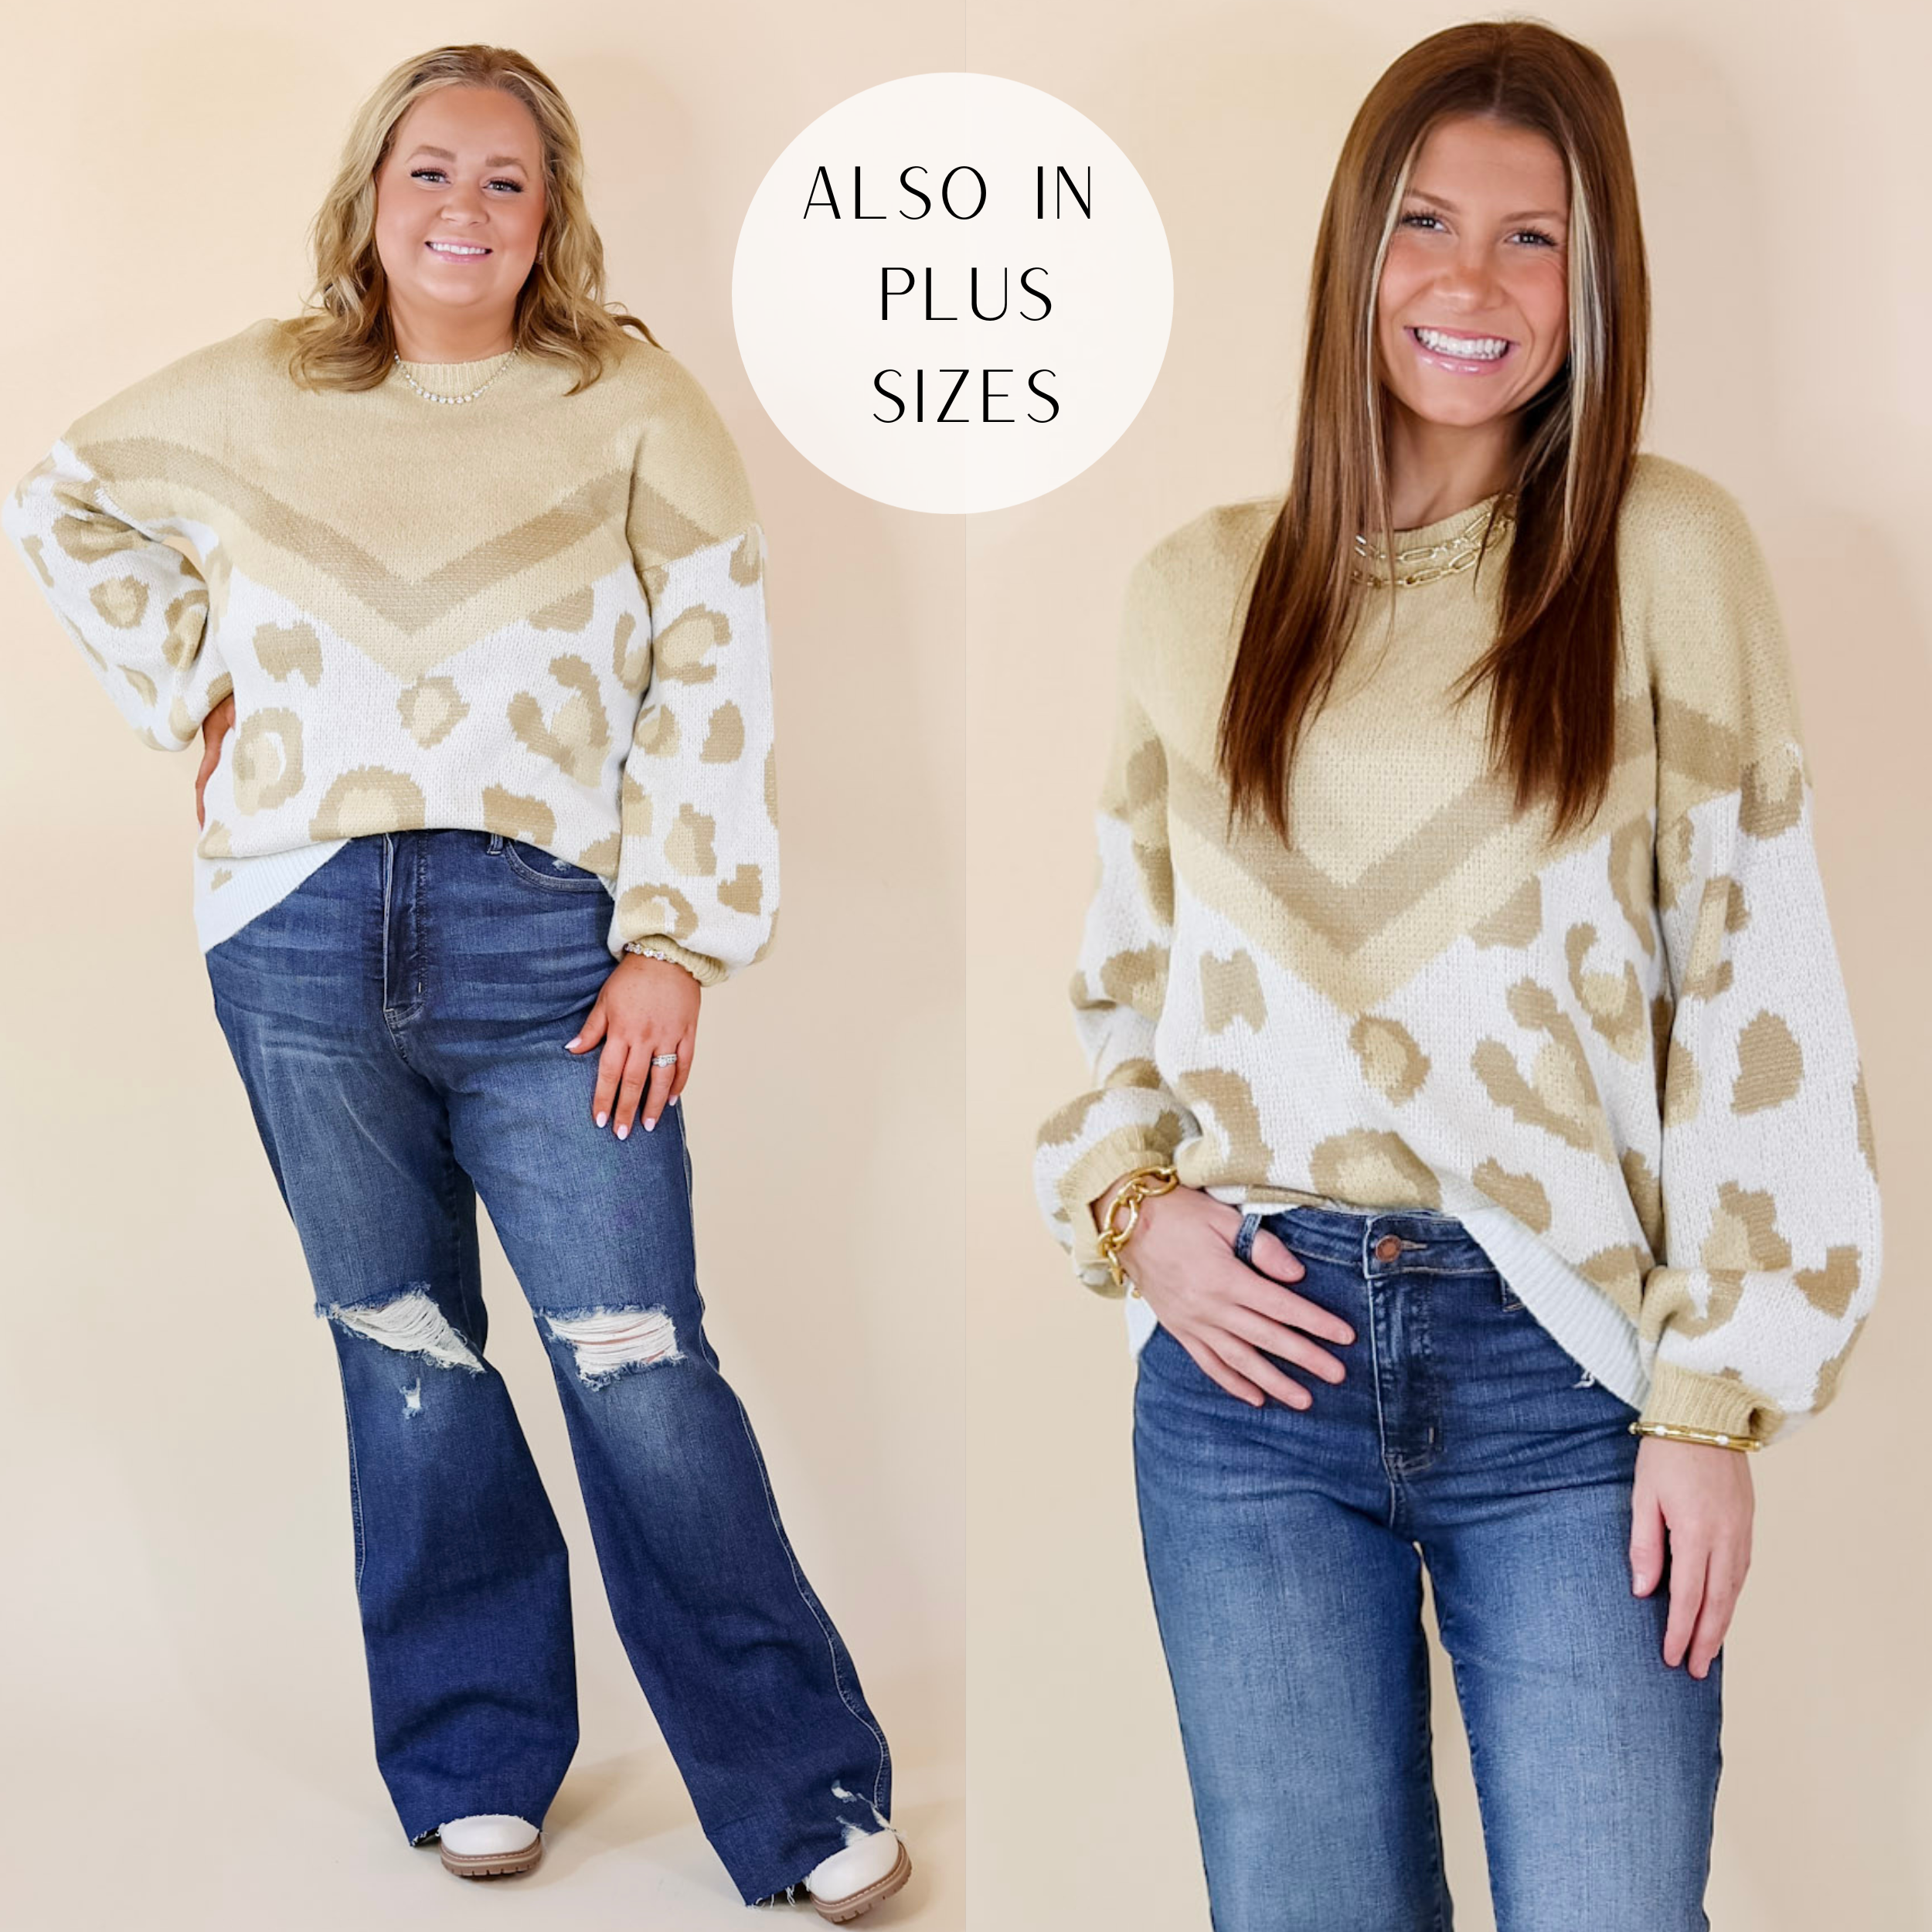 Image of Thankful Thoughts Leopard Print and Chevron Print Block Sweater in Beige